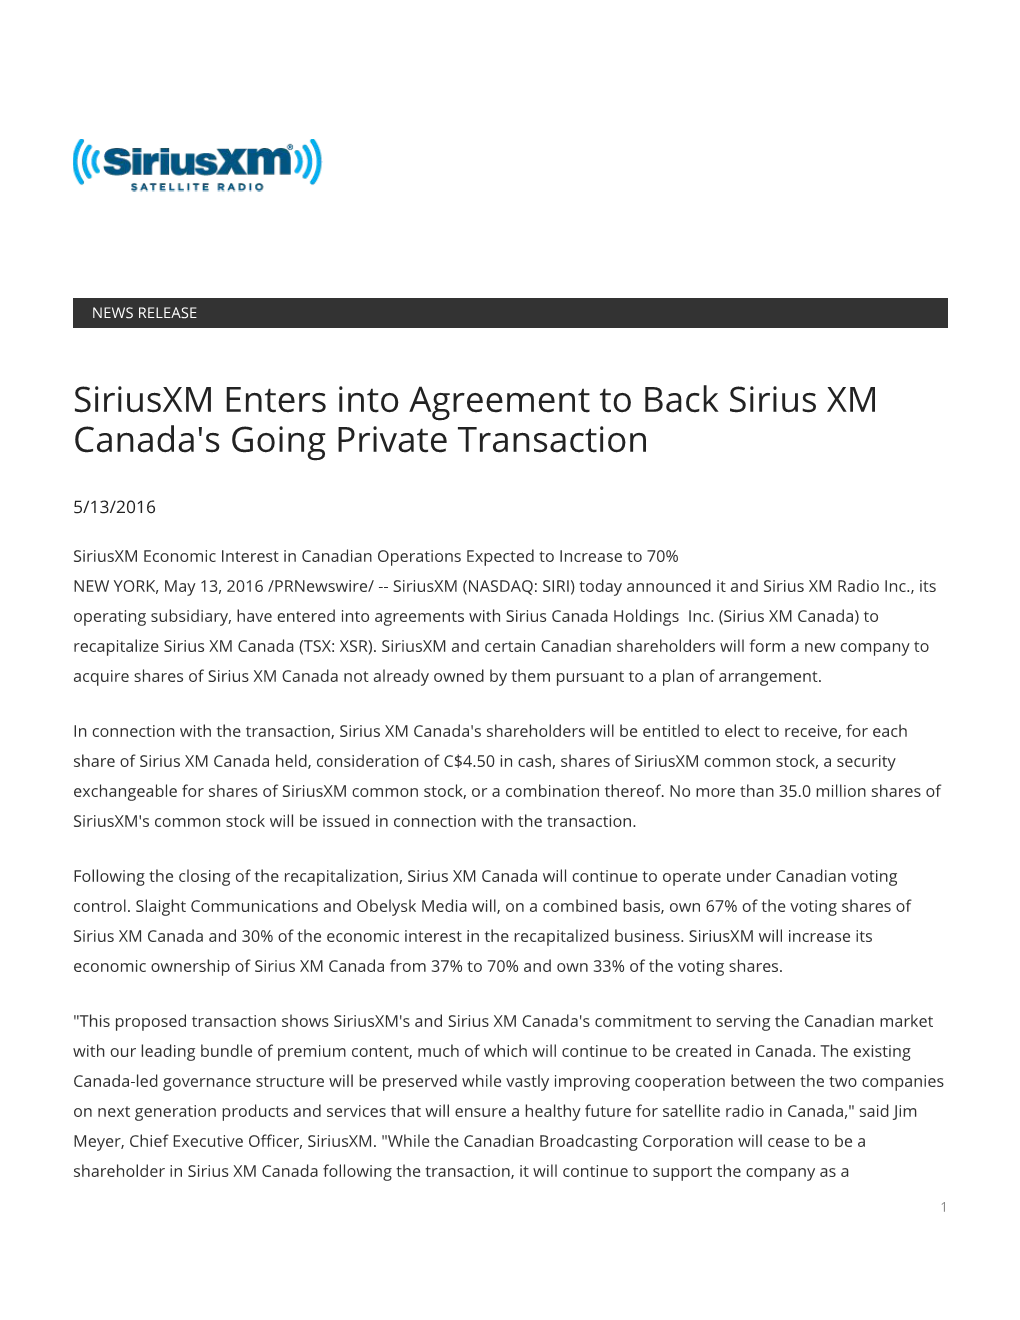 Siriusxm Enters Into Agreement to Back Sirius XM Canada's Going Private Transaction